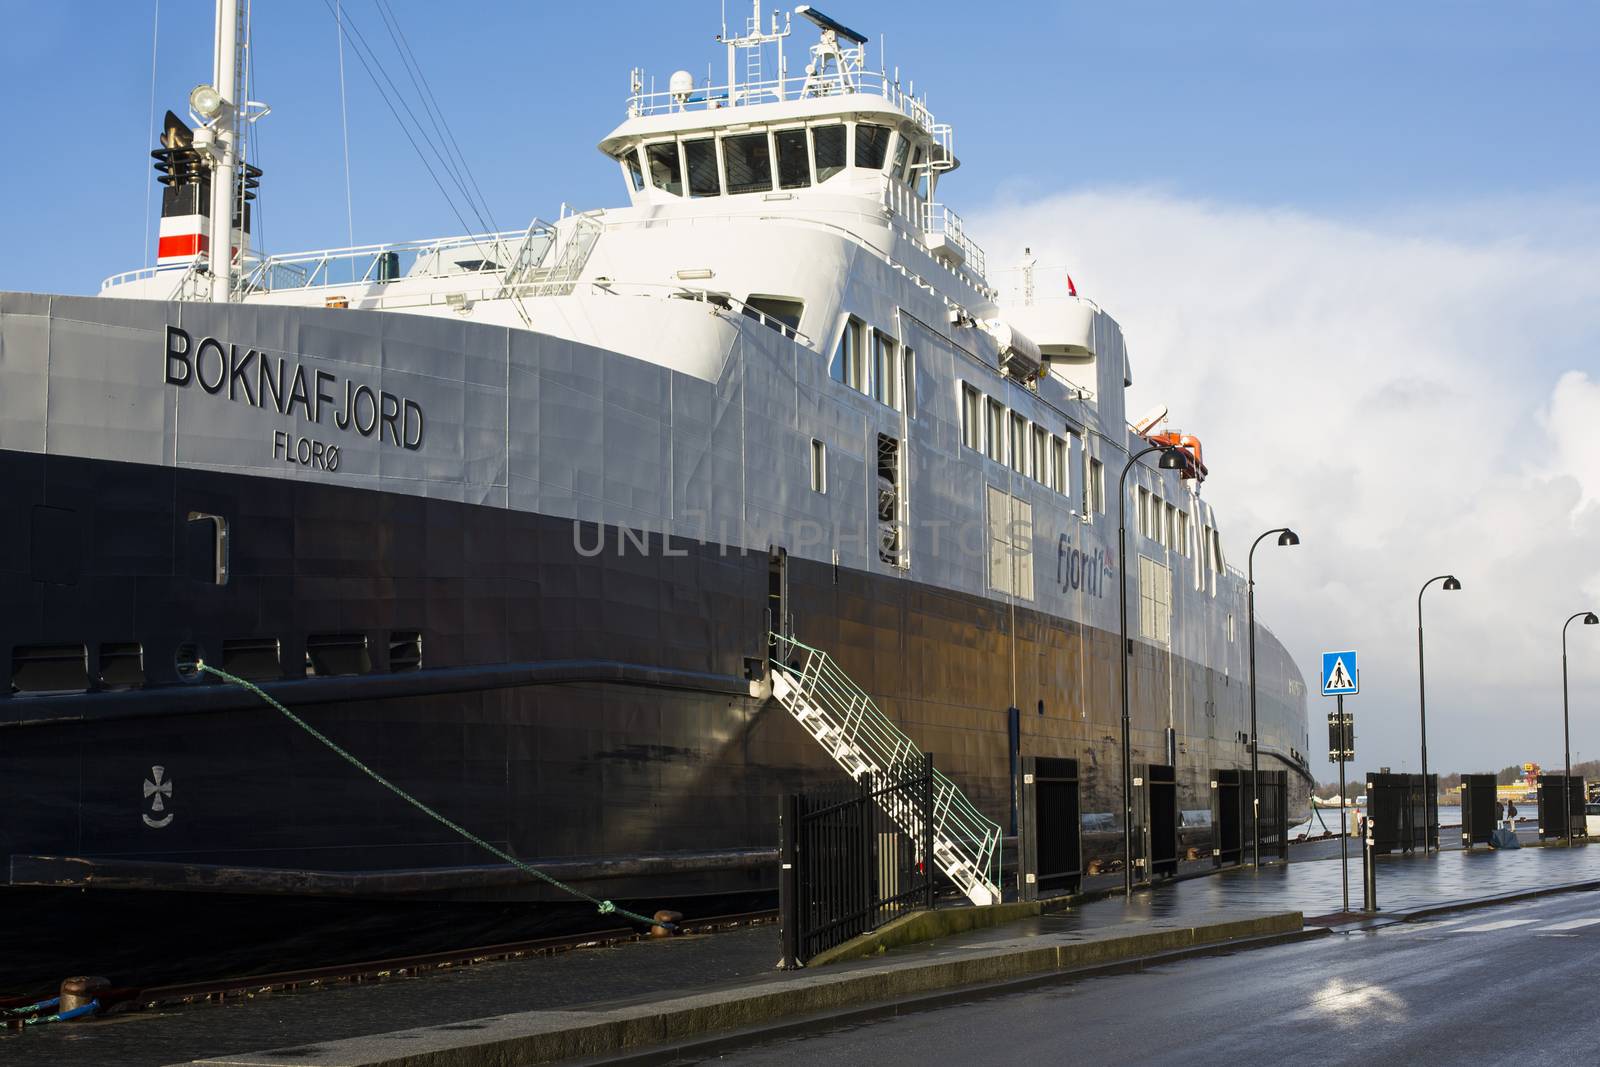 The Boknafjord Car Ferry Tied up in the Port of Stavanger by Whiteboxmedia